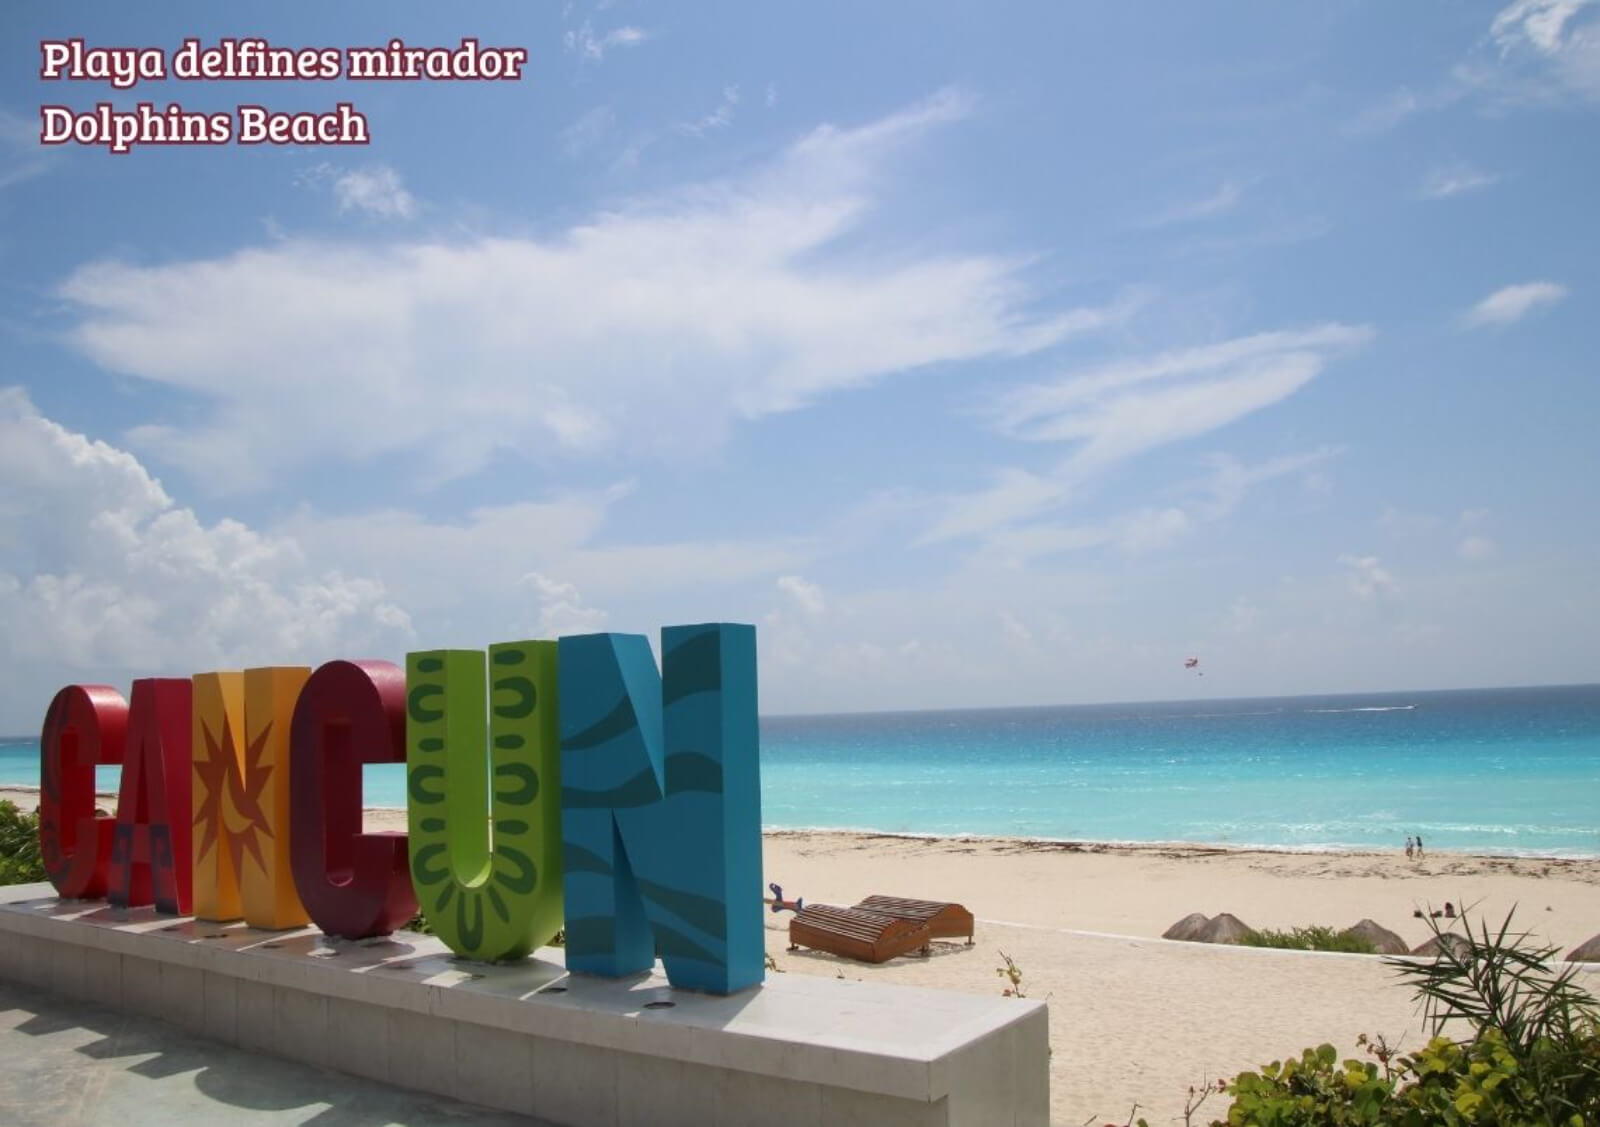 Penthouse with 21 m2 terrace, infinity pool, pet spa, cowork, gym, pre-construction, on Nader Avenue, Cancun, for sale.